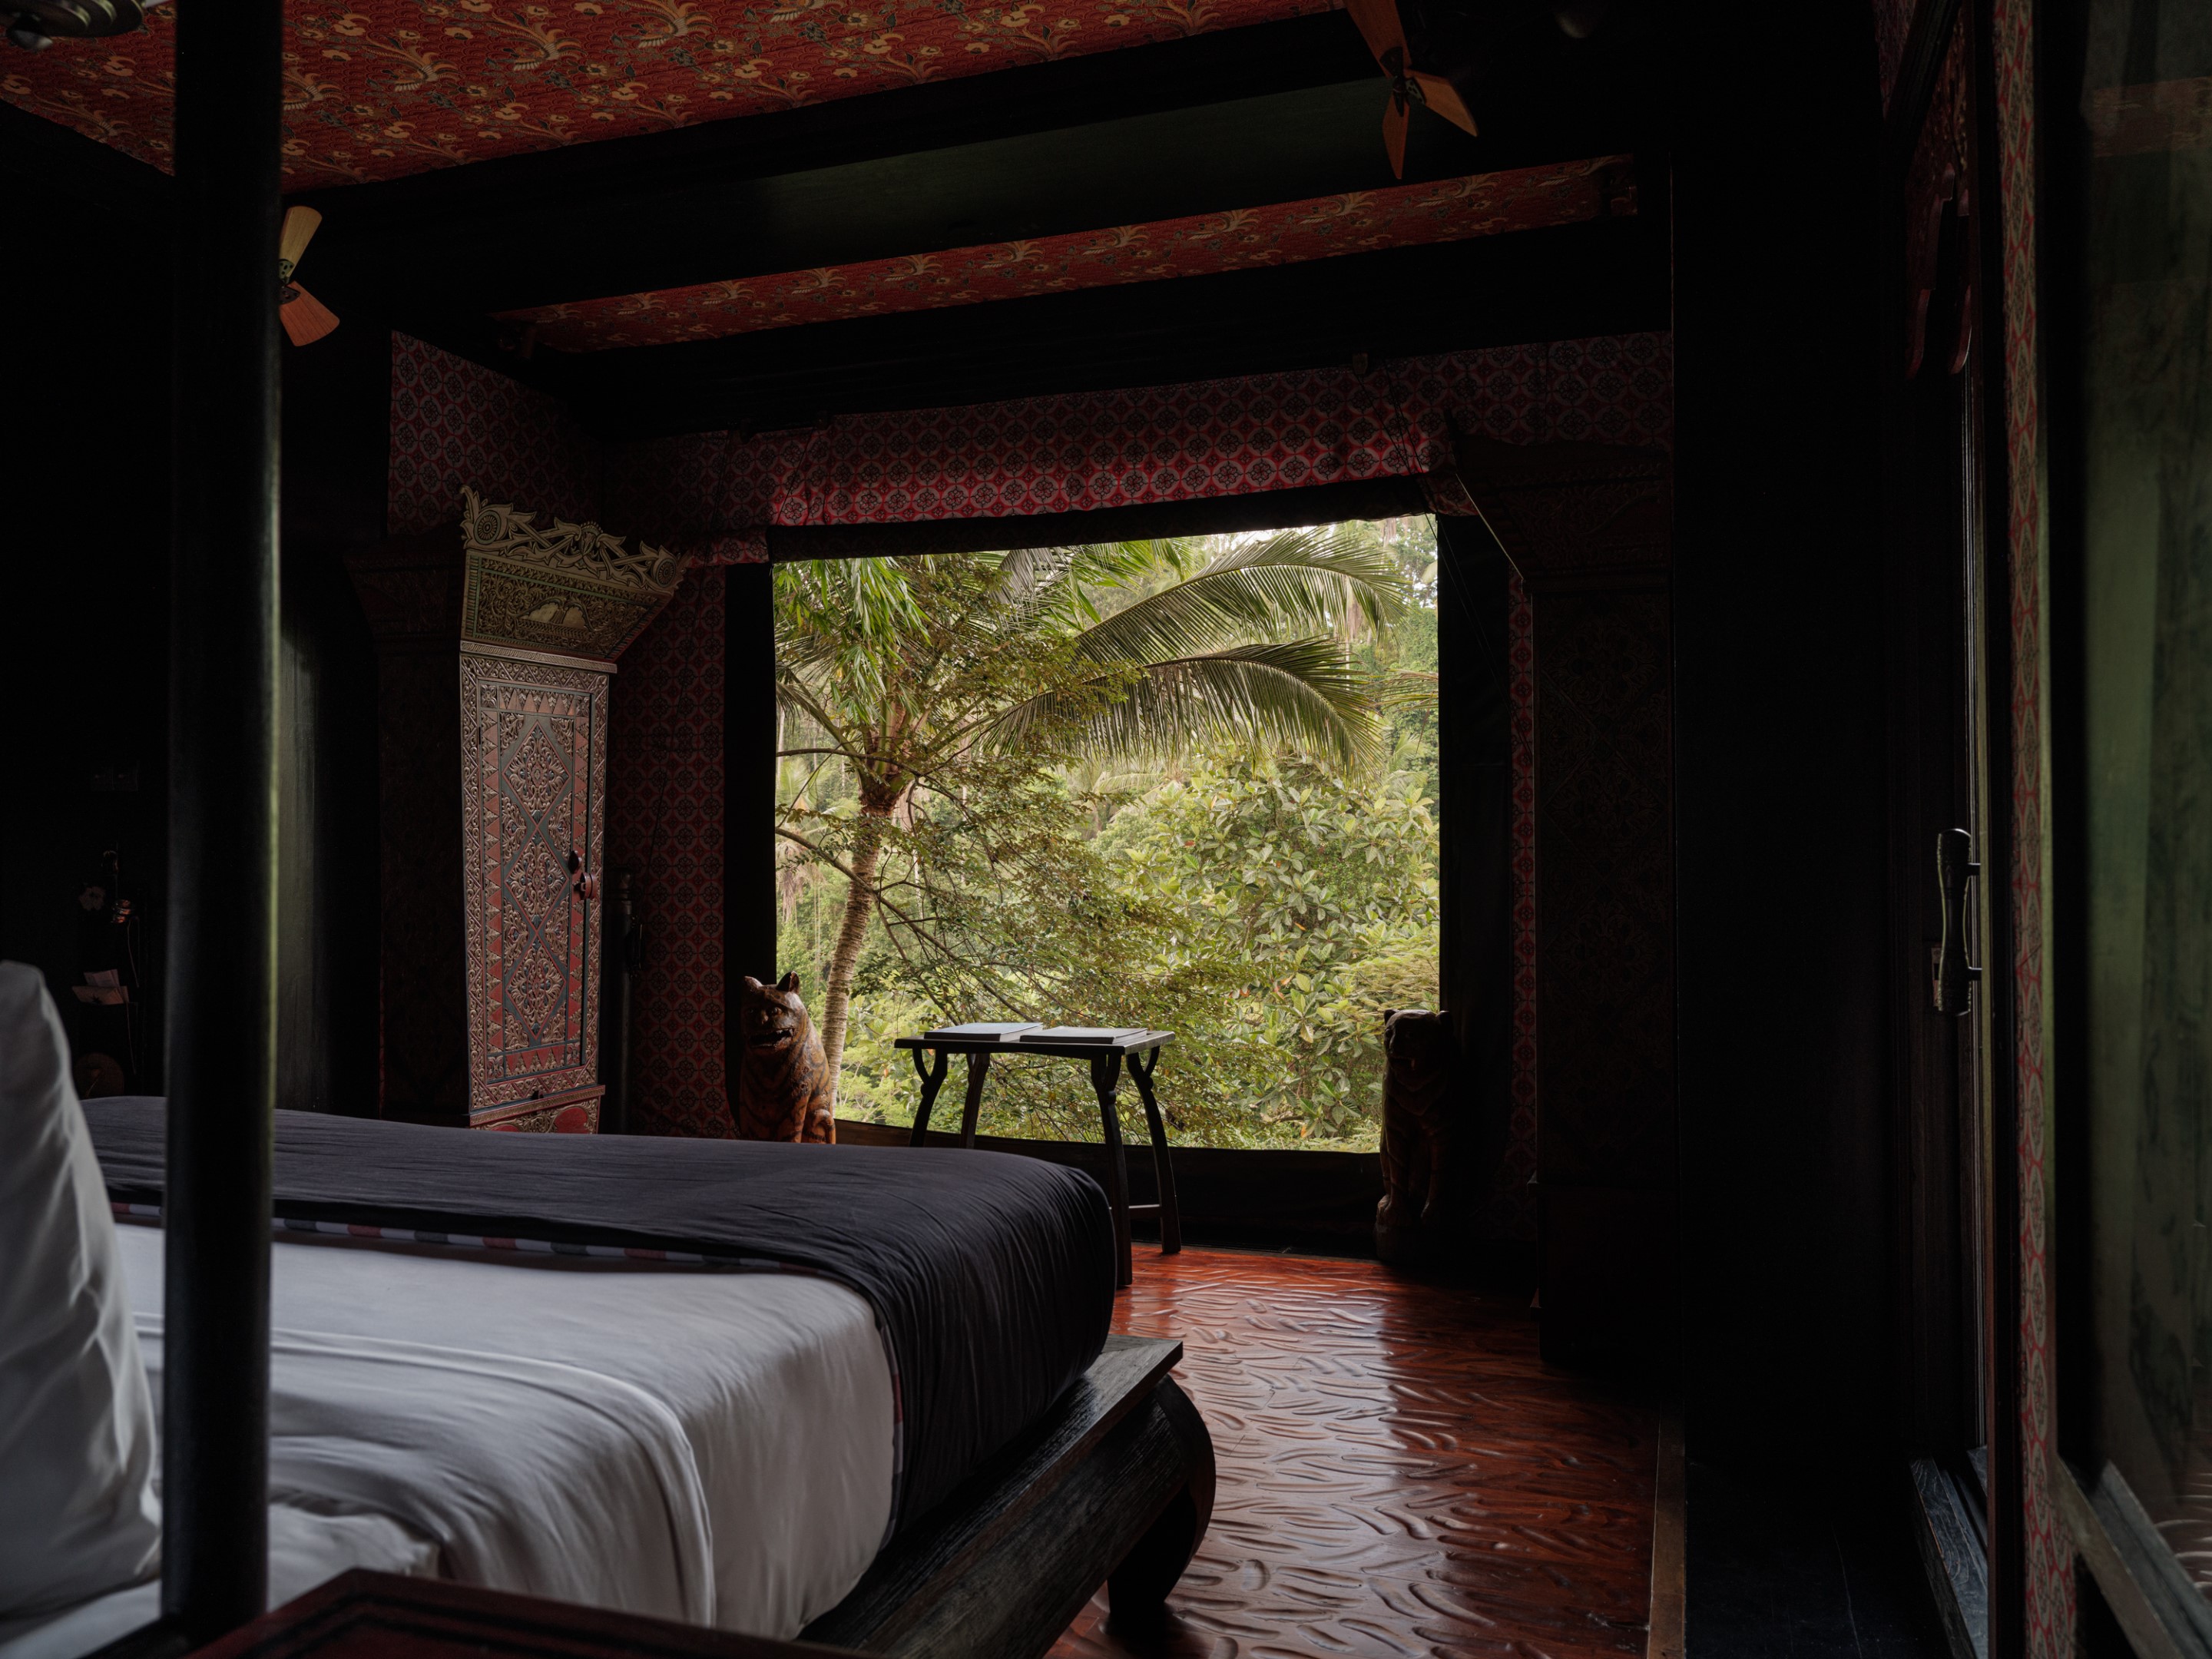 capella ubud bali the lodge, The Lodge at Capella Ubud, Bali enchants travellers with its tented luxury